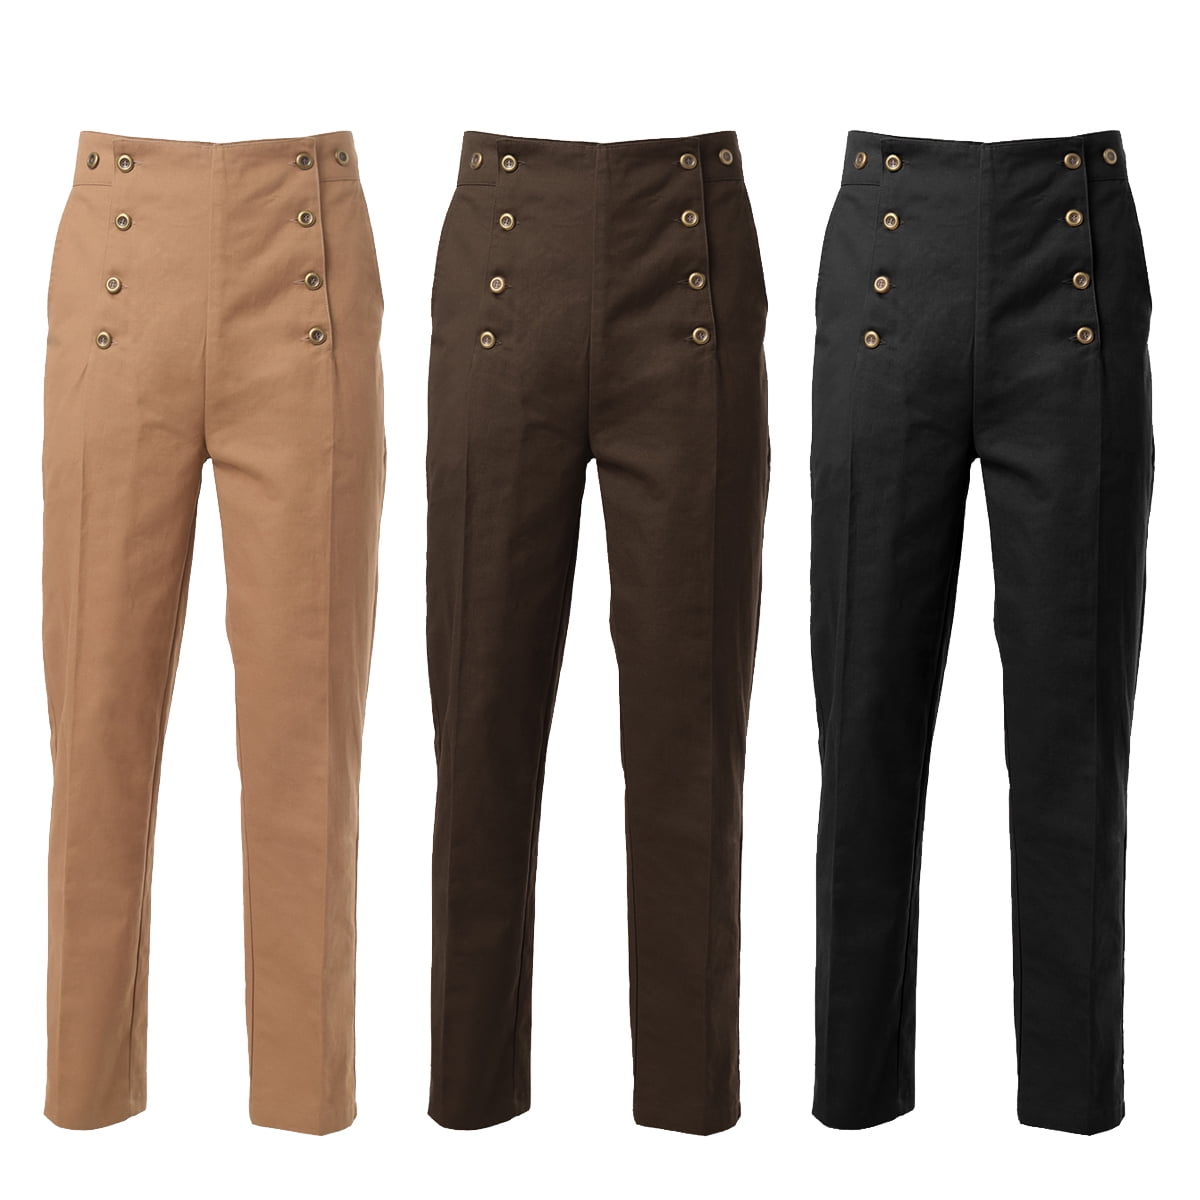 Regency Fashion Mens Breeches Pantaloons and Trousers  Jane Austens  World